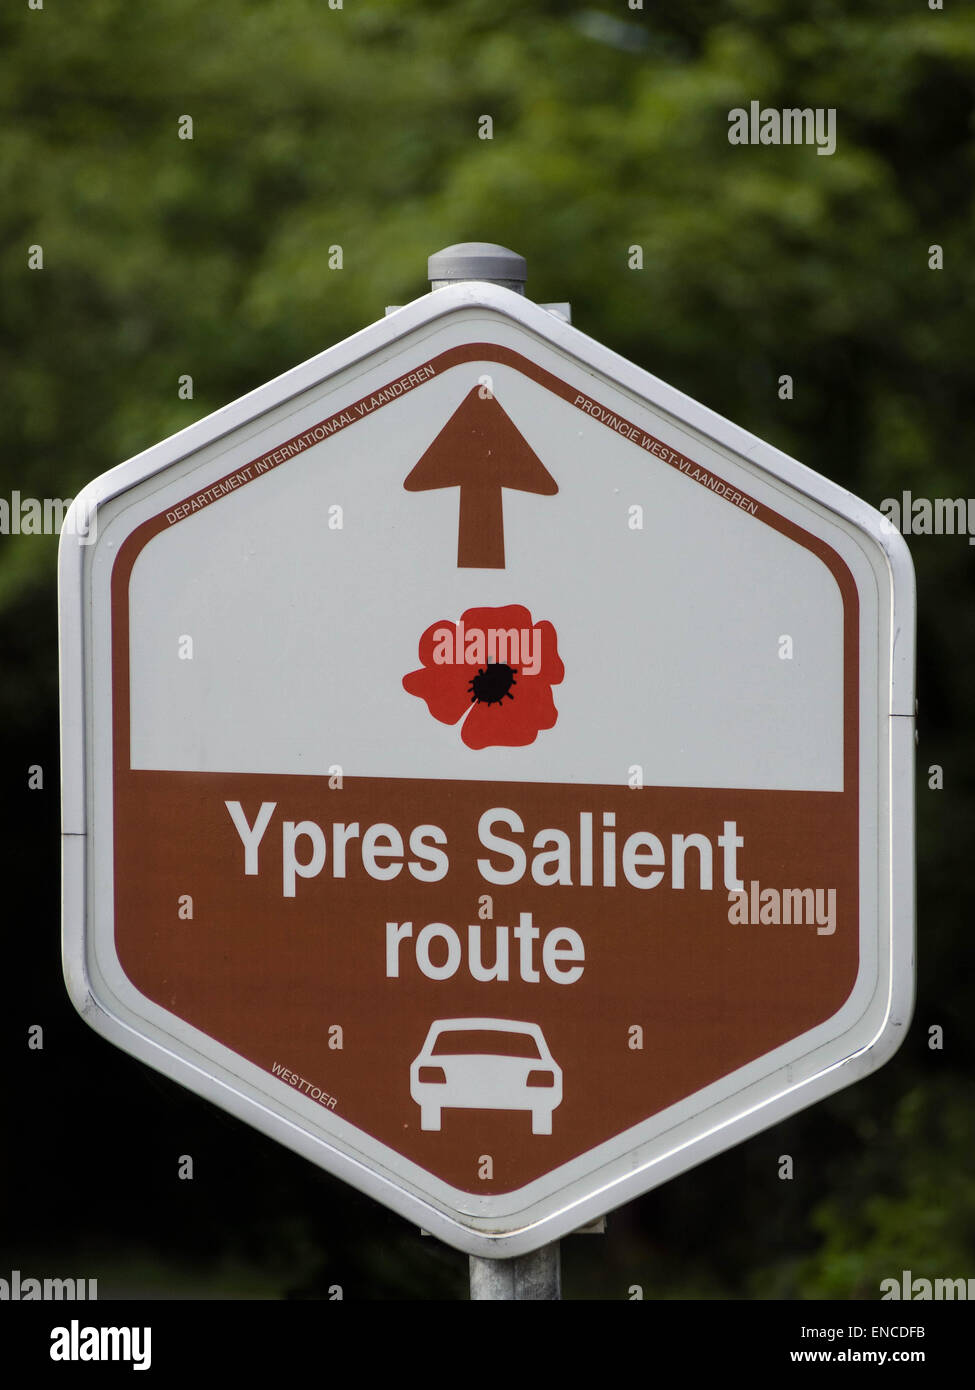 YPRES, BELGIUM - MAY 25, 2014:  Sign for the self-drive Ypres Salient route which takes in all the sites associated with the Flanders battlefields Stock Photo